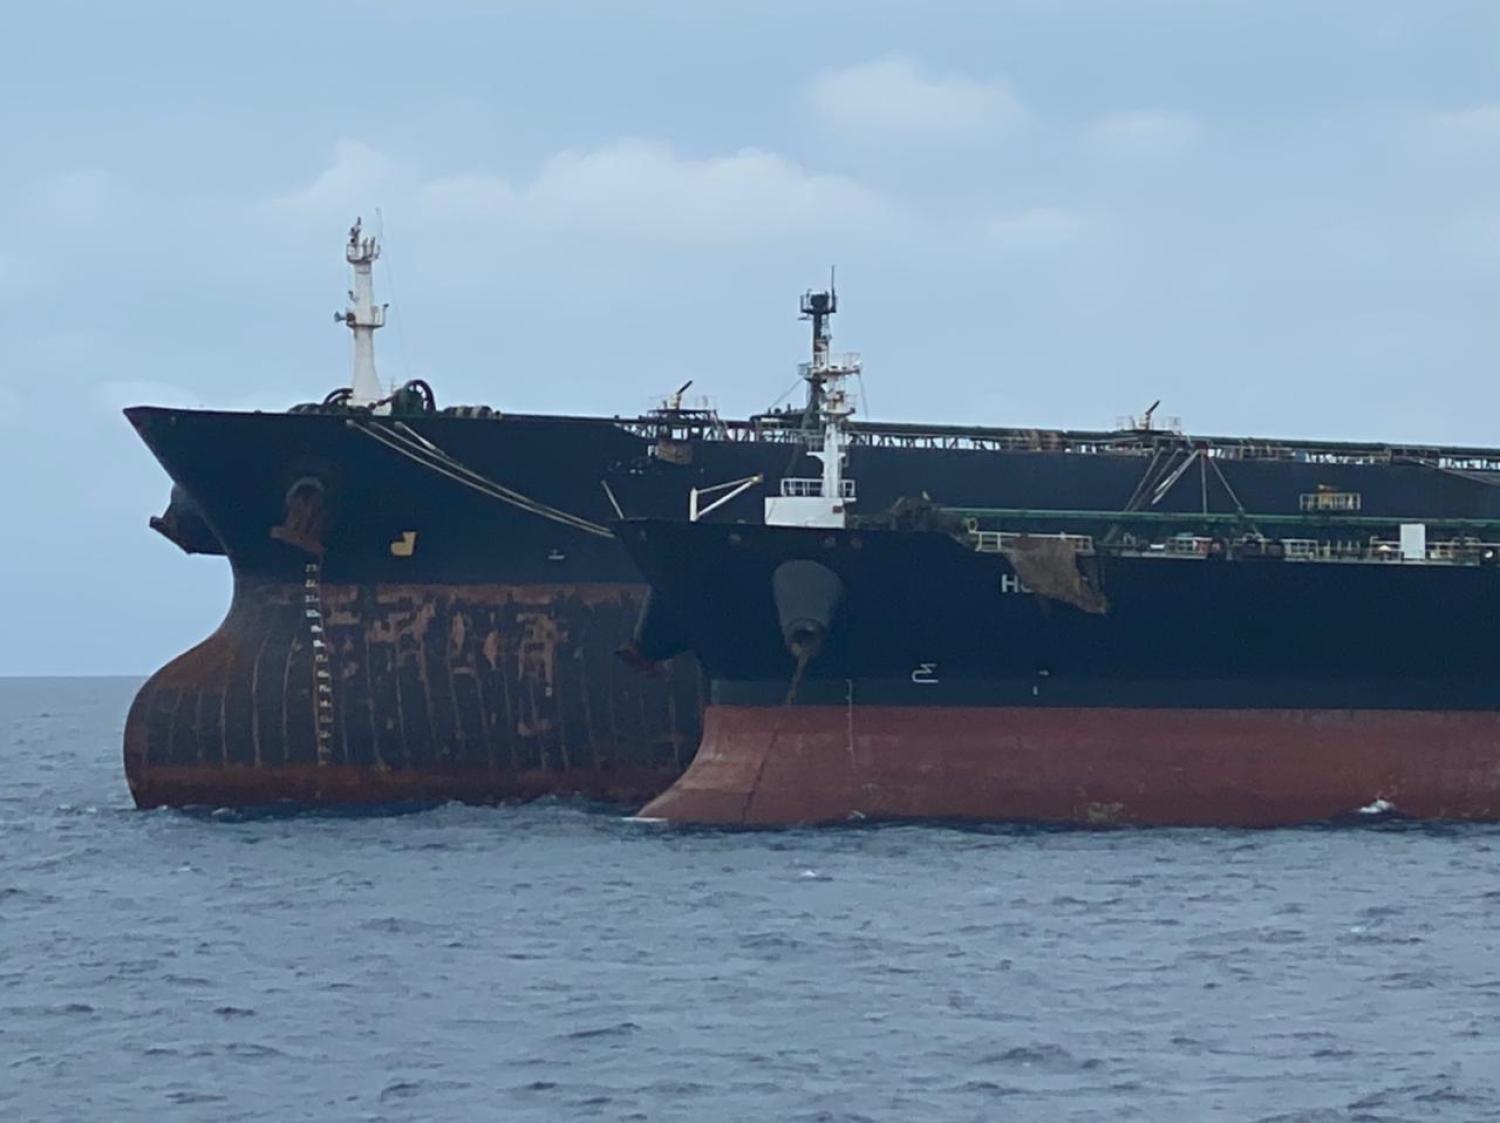 MT Horse and MT Freya detained off West Kalimantan - note the covering over the vessel name (Indonesian Coast Guard/Anadolu Agency via Getty Images)